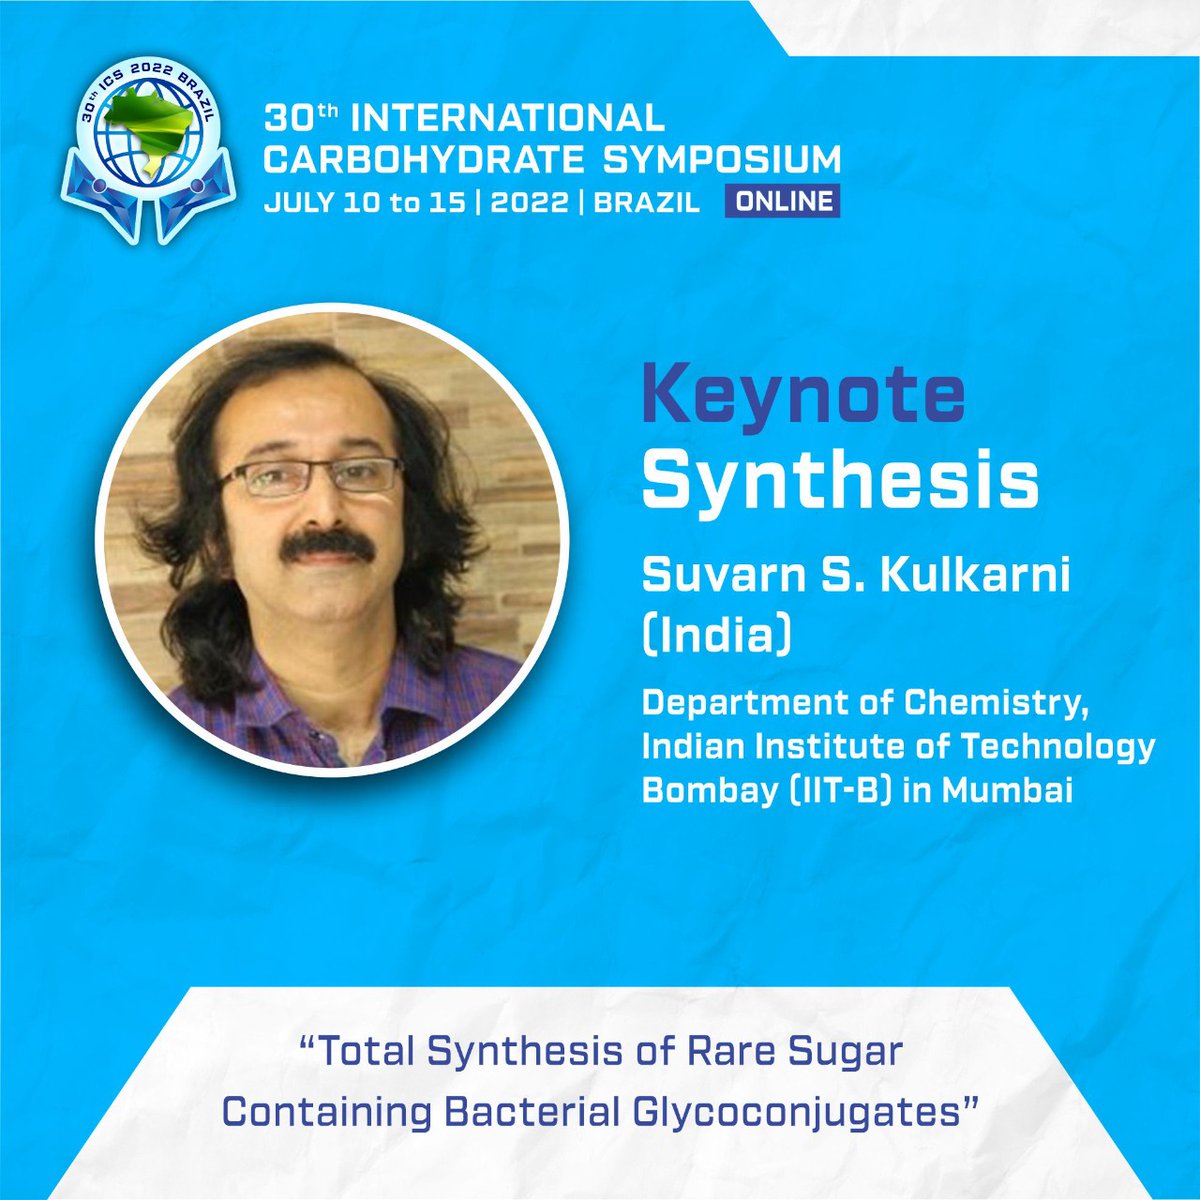 Directly from the Department of Chemistry at @iitbombay, Suvarn S. Kulkarni will give an important talk at the ICS2022:

'Total Synthesis of Rare Sugar Containing Bacterial Glycoconjugates'

Are you ready for all this knowledge exchange? 📚